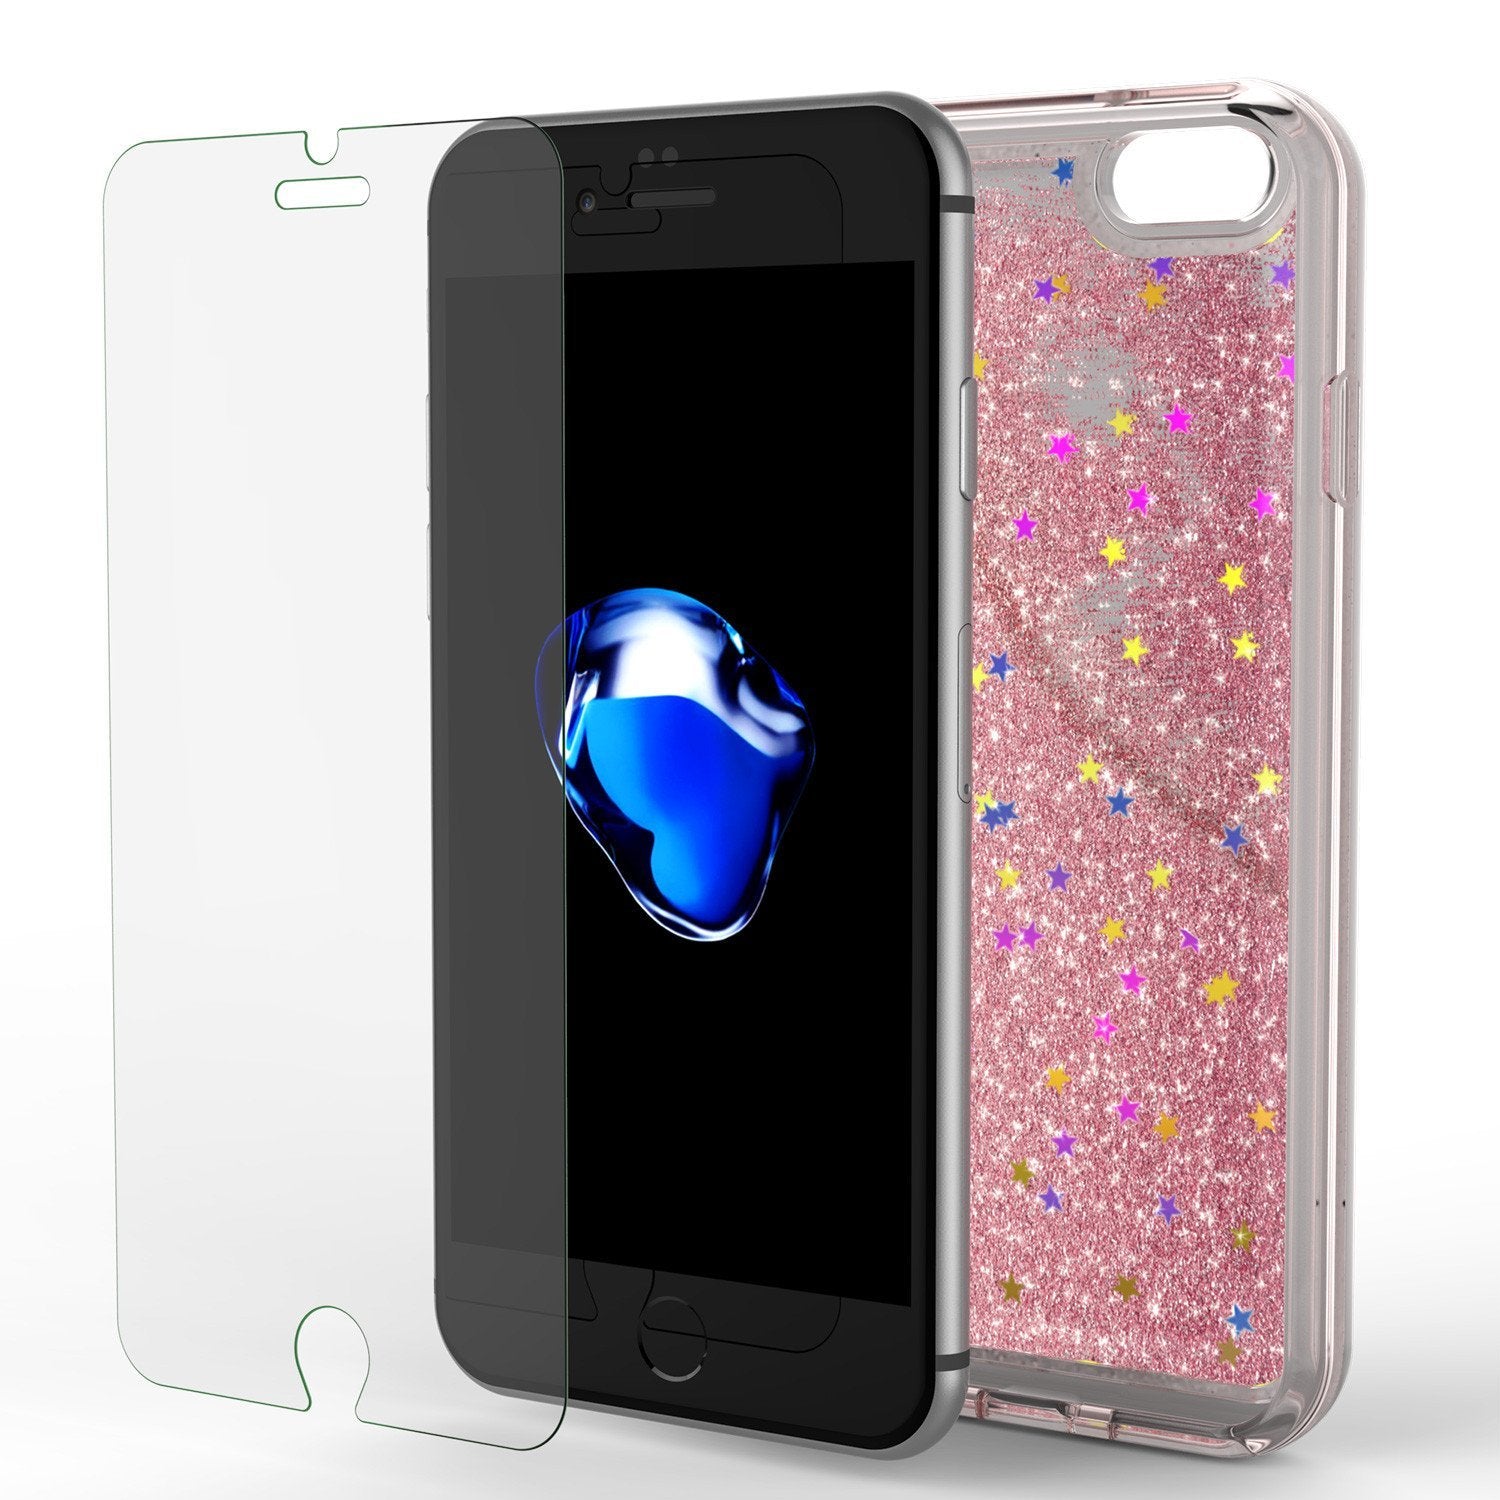 iPhone 8 Case, PunkCase LIQUID Rose Series, Protective Dual Layer Floating Glitter Cover - PunkCase NZ